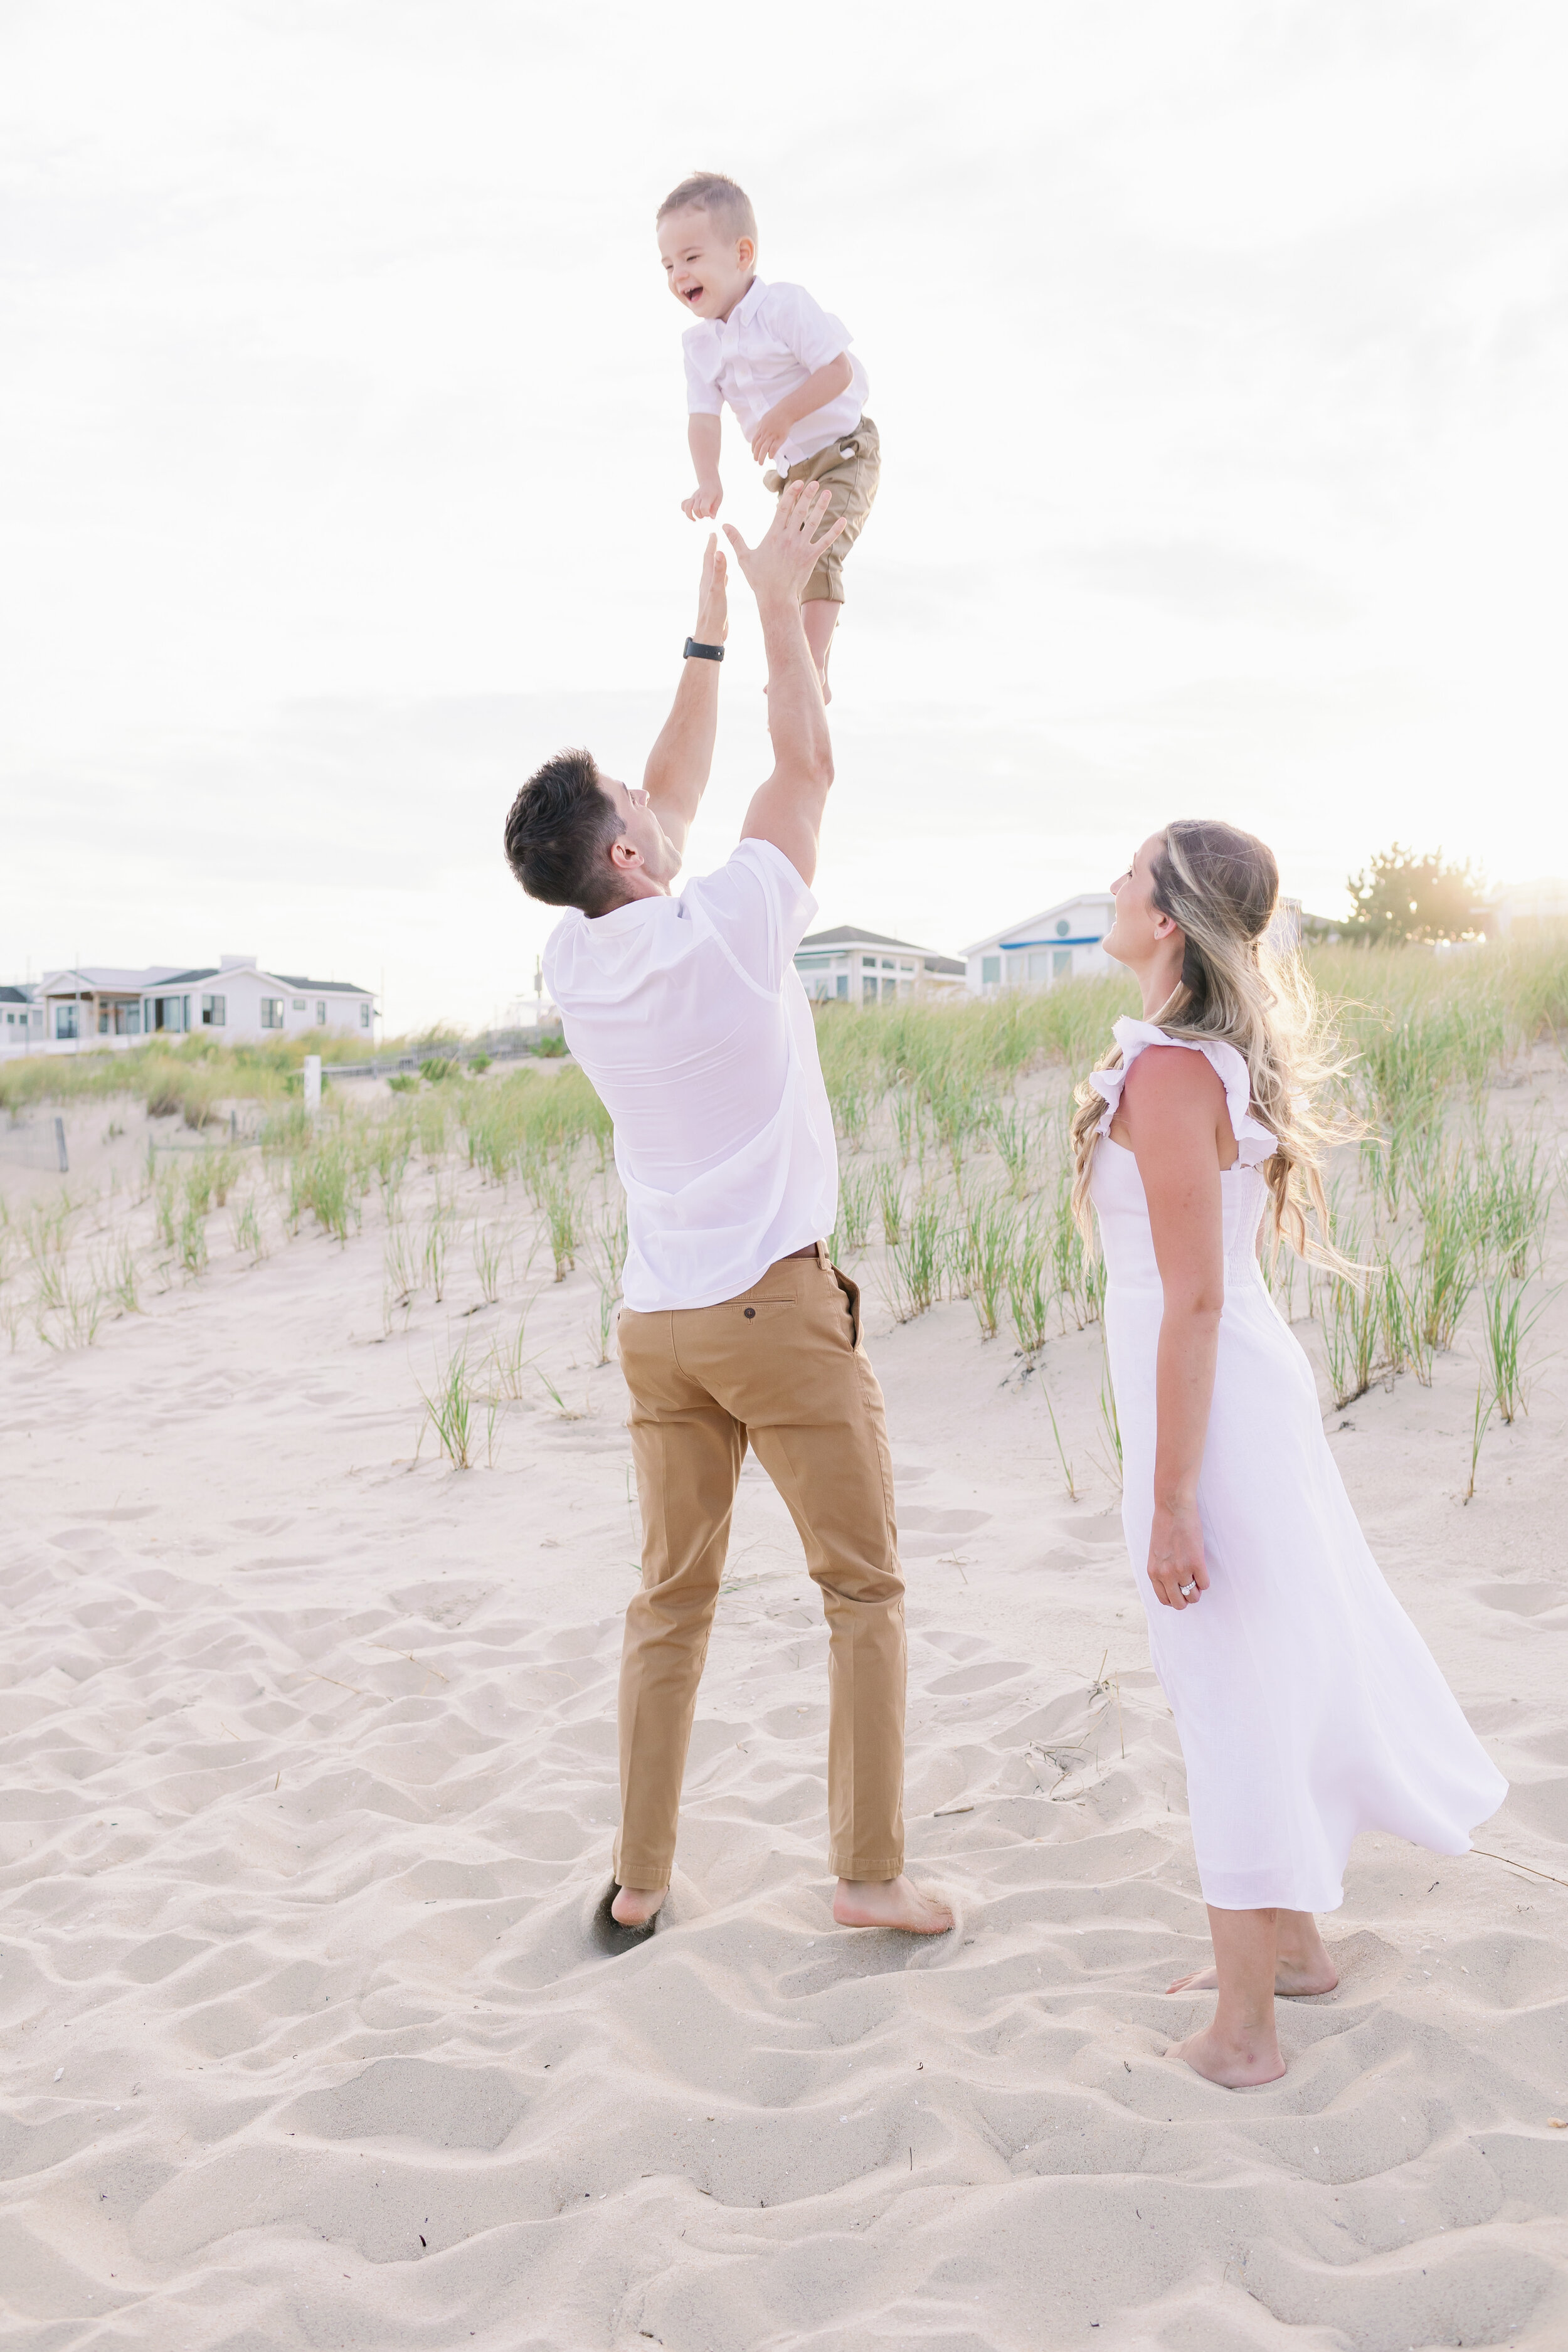 Dad throwing toddler in air while mom watches during beach photos | NKB Photo 